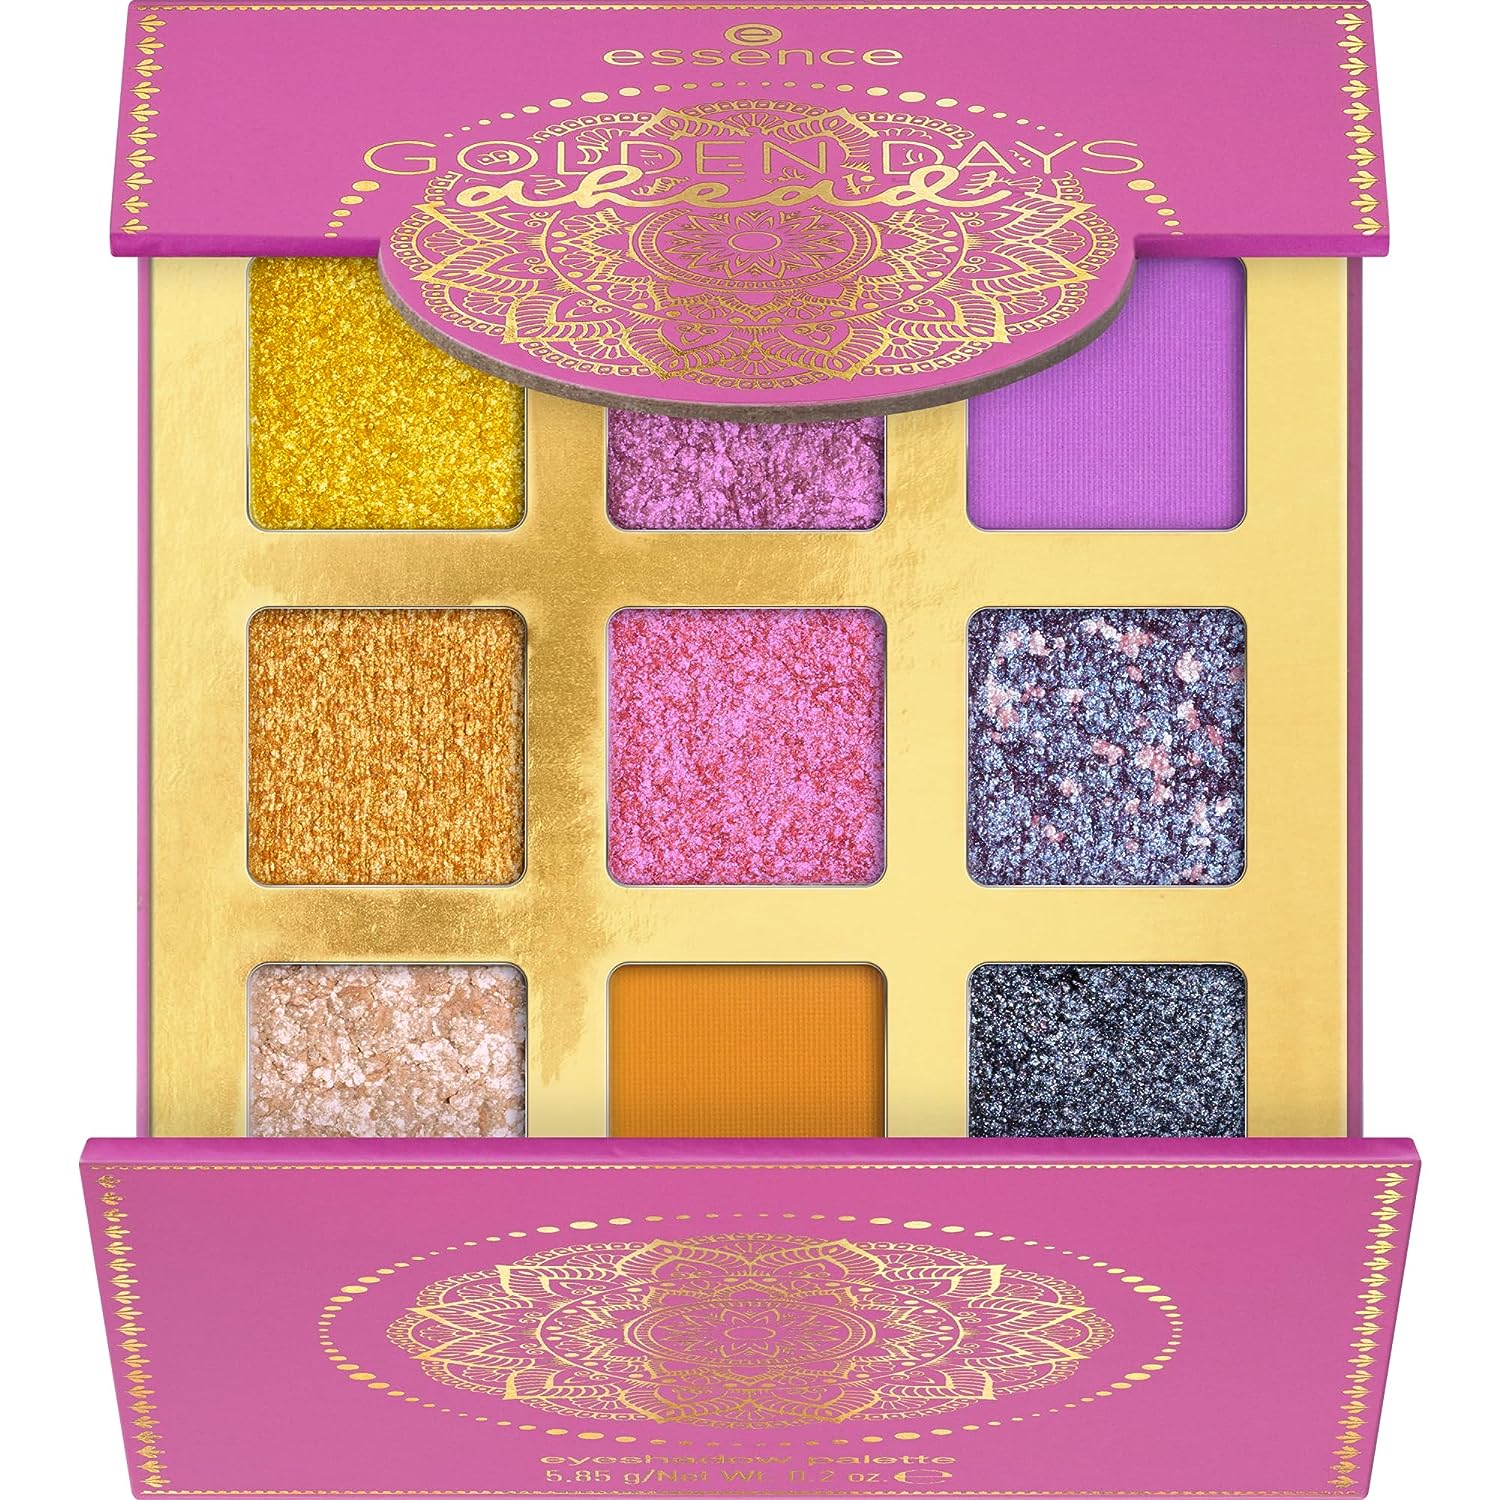 Essence Golden Days ahead Eyeshadow Palette, No. 01, Multicoloured, 9 Colours, Glossy, Intense, Vegan, No Microplastic Particles, Nanoparticles Free, Perfume, Pack of 1 (5.85 g)